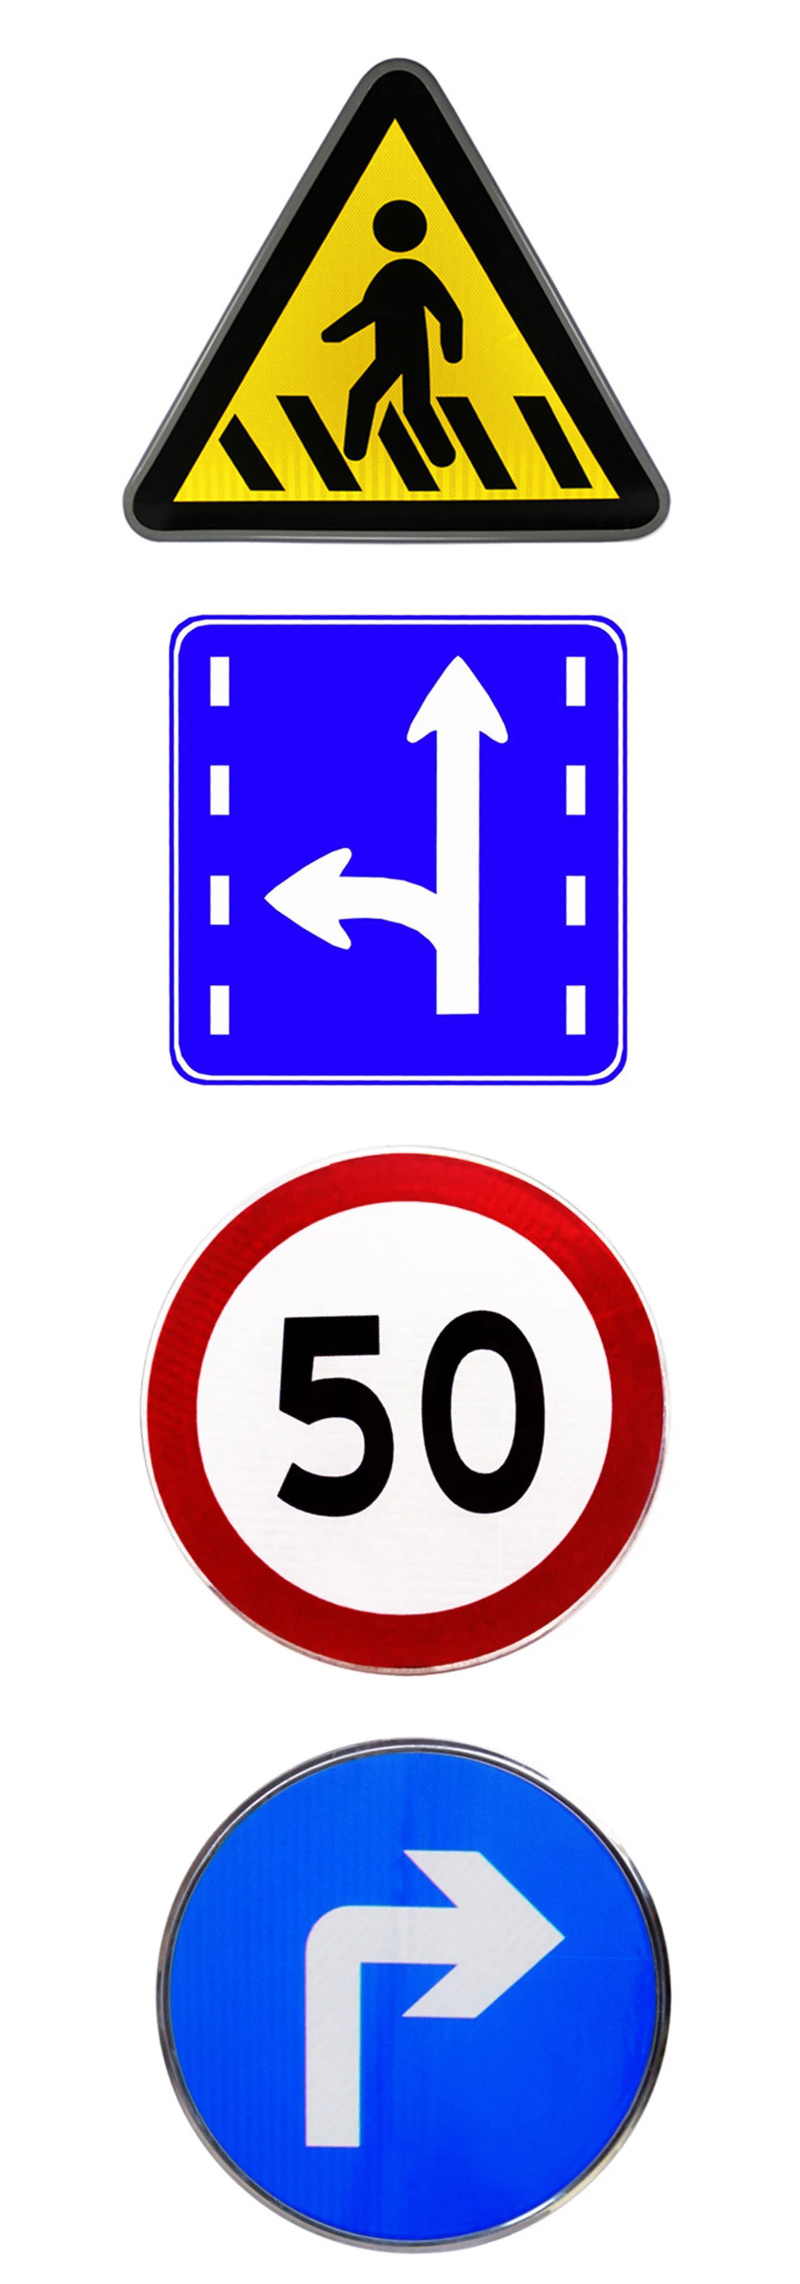 Highway Directional Guiding Traffic Warning Sign on Sale